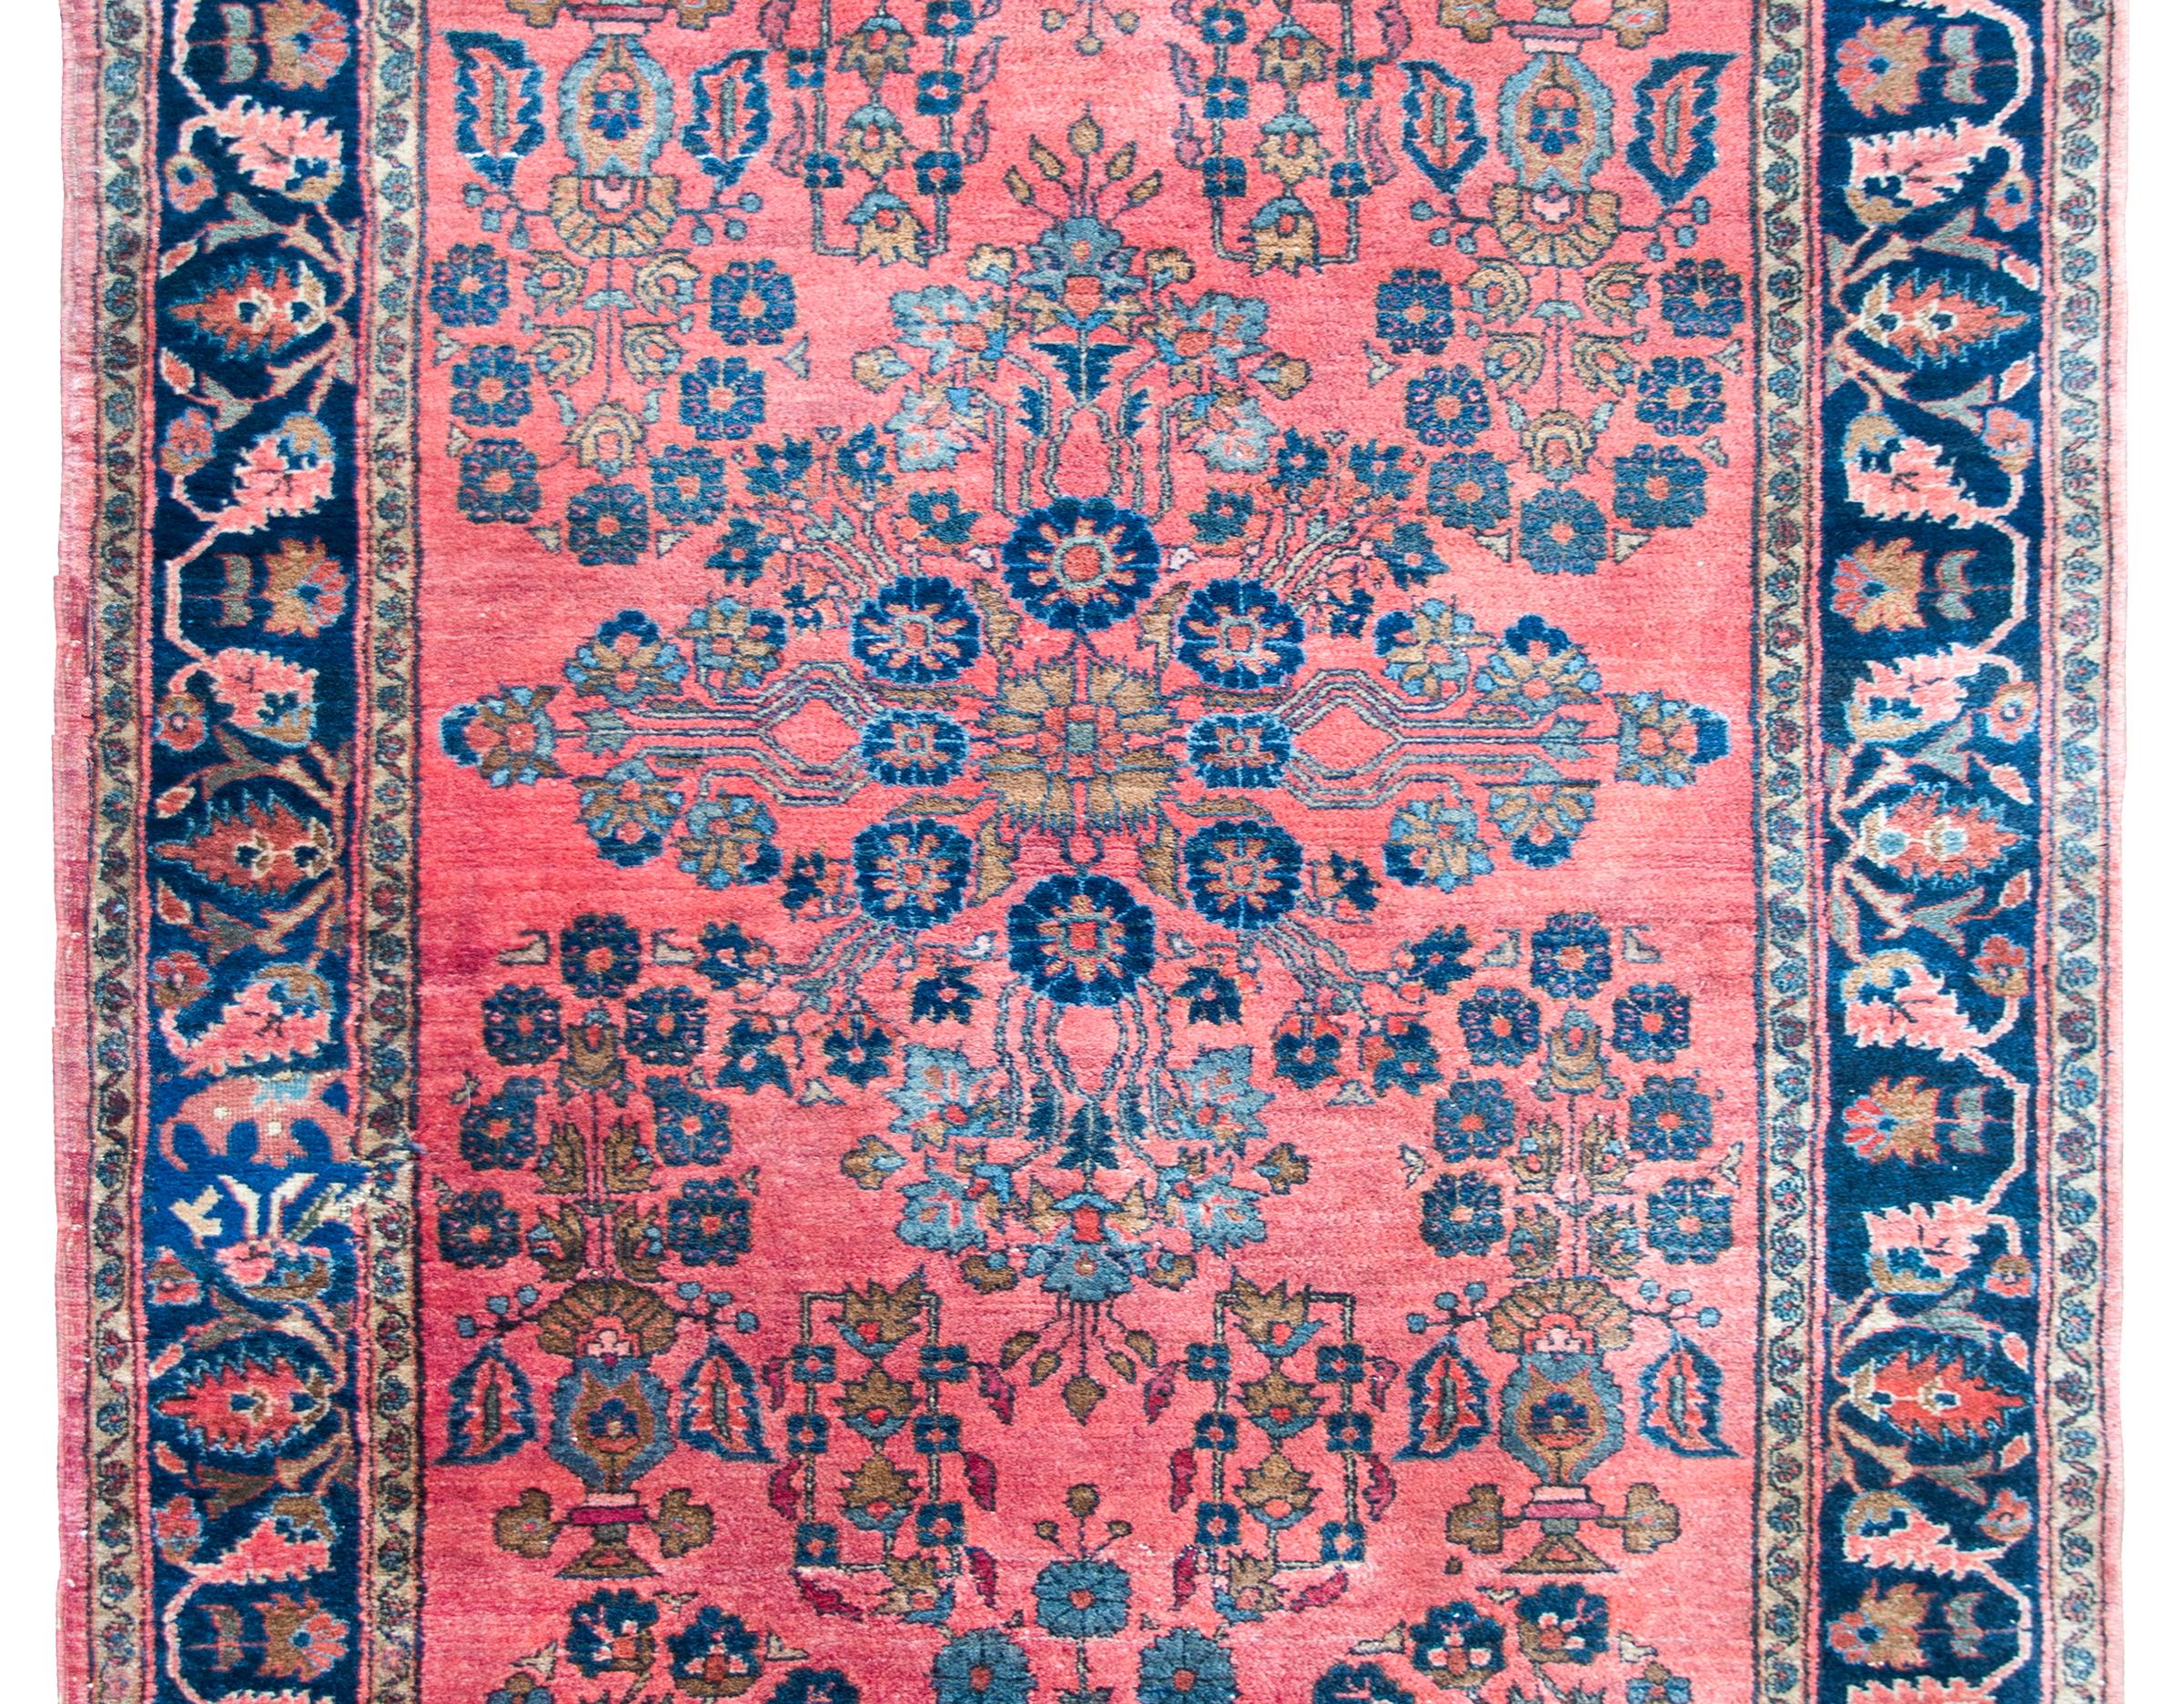 A wonderful early 20th century Persian Sarouk rug with a central floral medallion amidst a field with a mirrored floral pattern all woven in pink, cream, and light and dark indigo, and set against a coral colored background. The border is beautiful